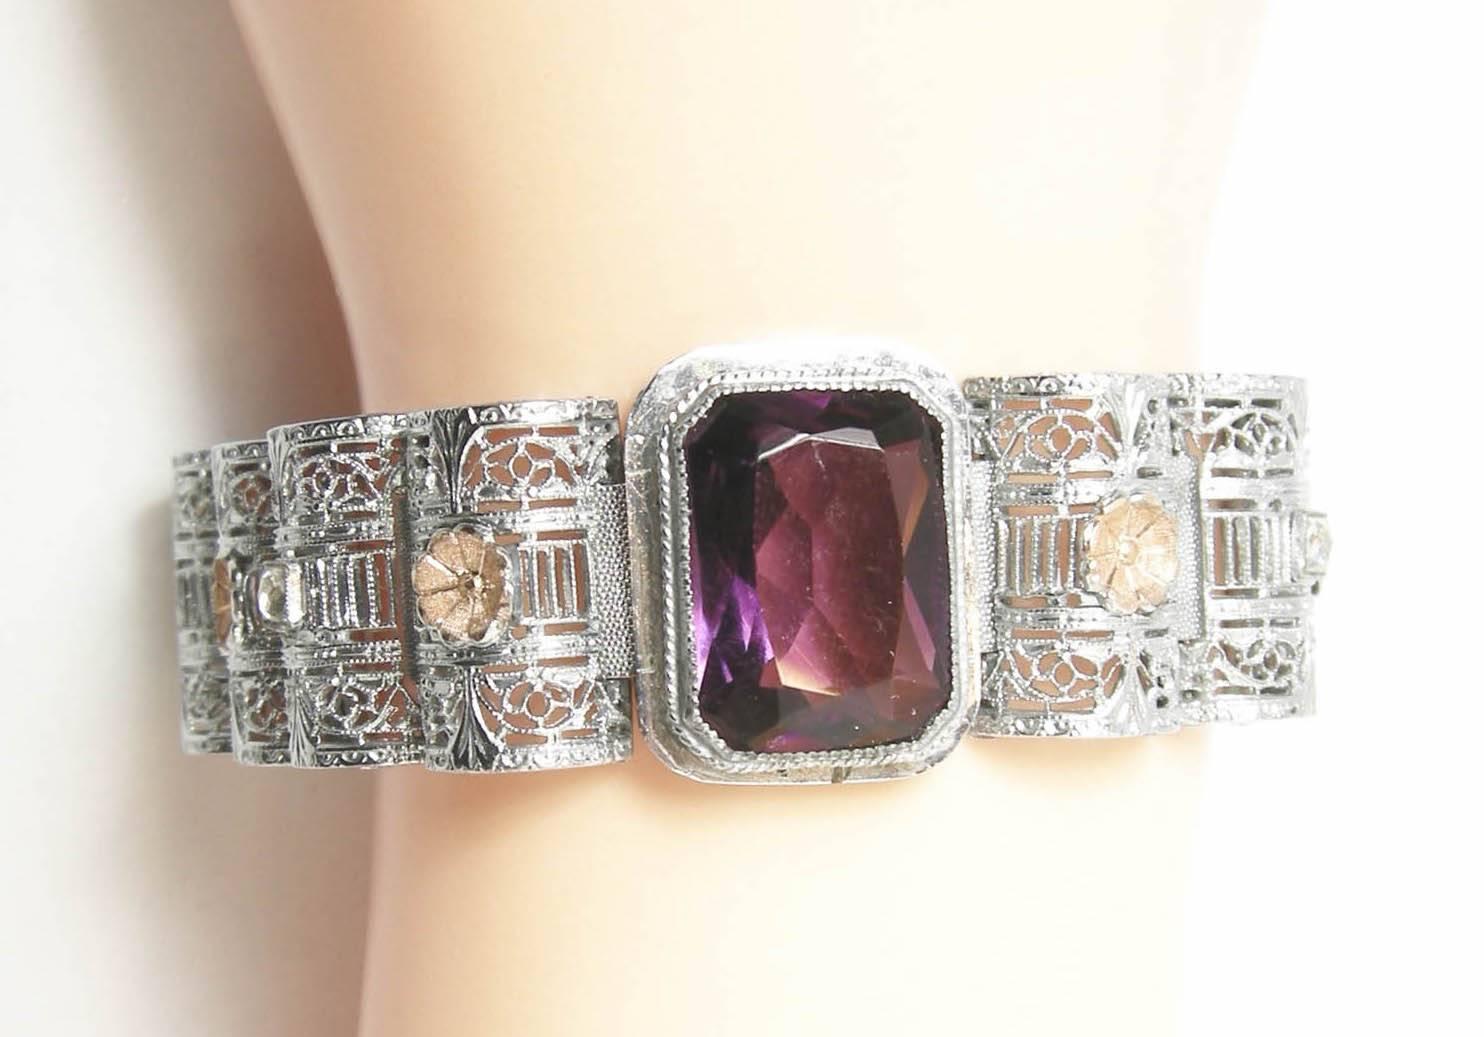 This vintage retro bracelet features a stunning, detailed design with a center, bezel cut amethyst glass stone on an openwork chrome setting with tiny gold-tone floral accents.  In excellent condition, this bracelet measures 7-1/2” x 3/4” with a